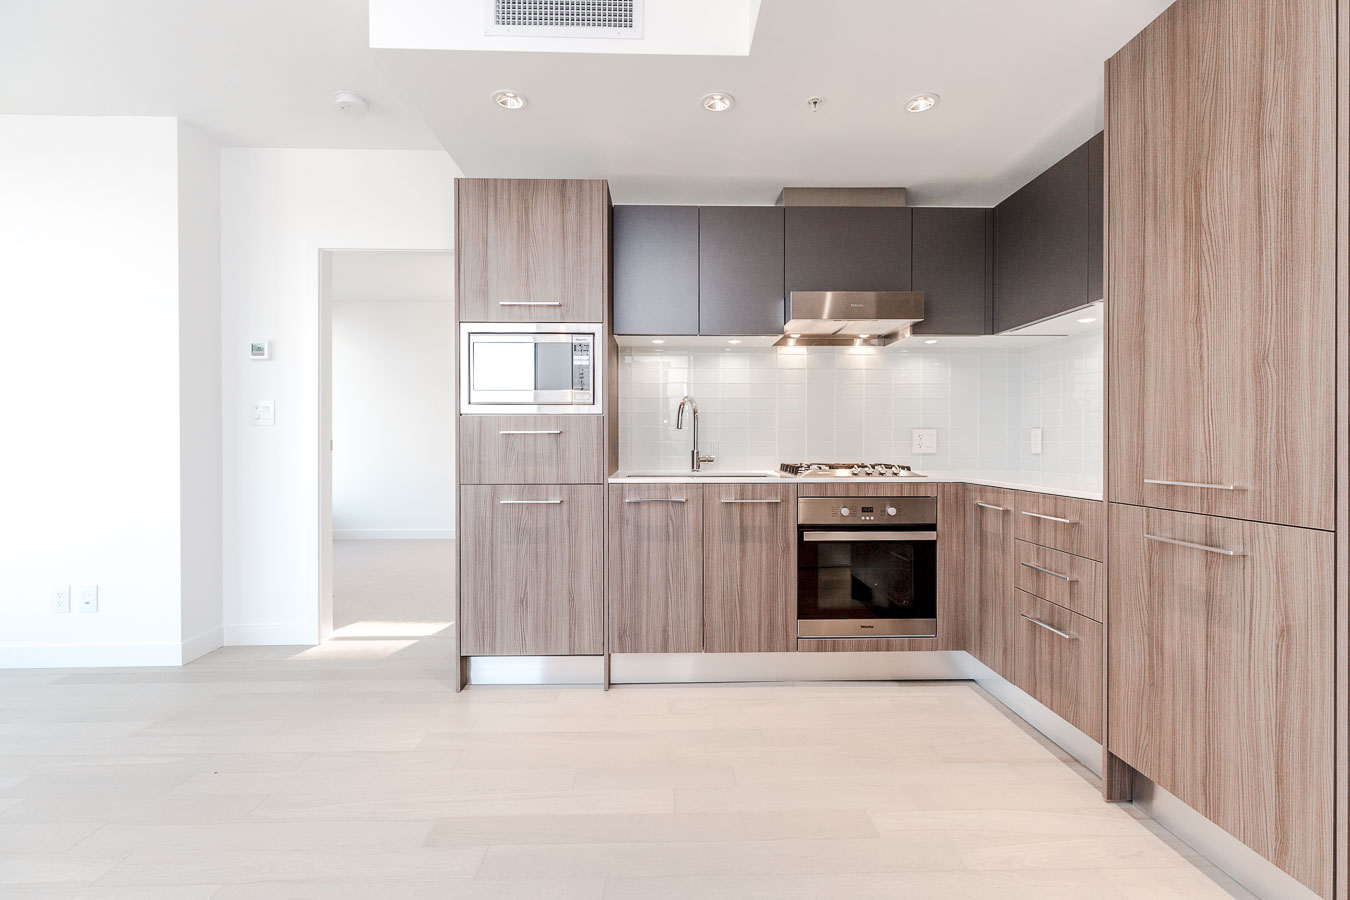 Kitchen with stainless steel appliances at Vancouver condo rental.